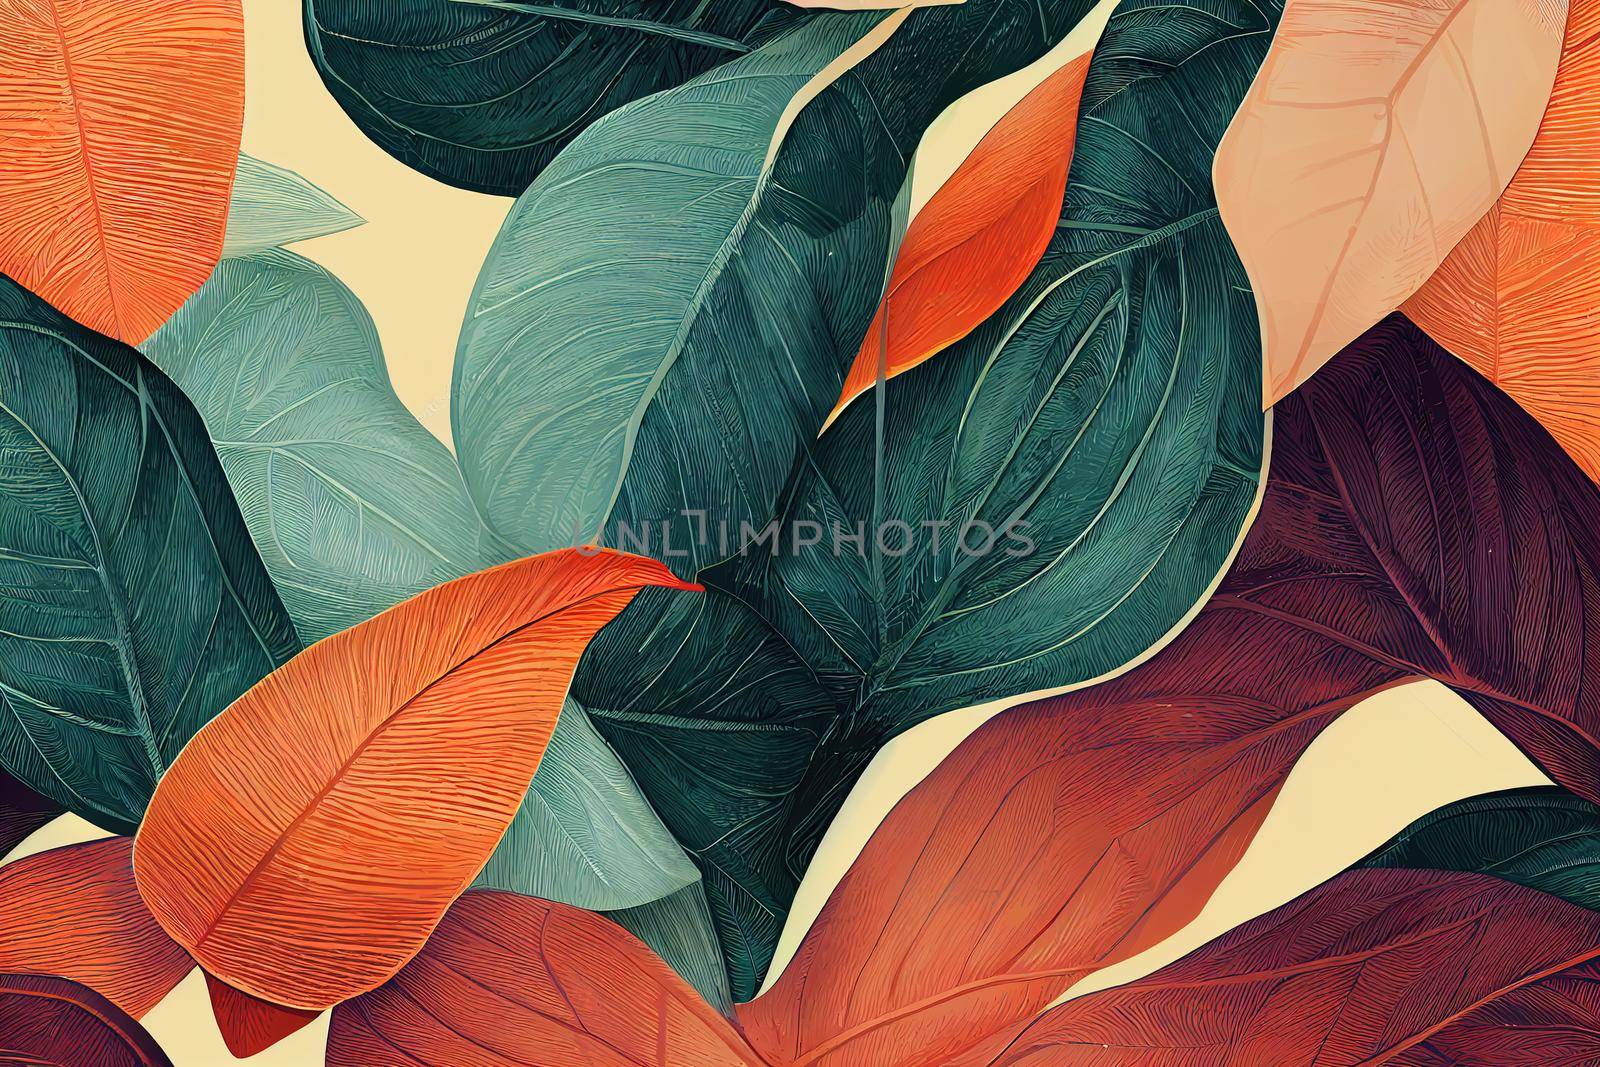 pattern with colorful exotic leaves. Abstract forms, textures, monstera, palm leaves